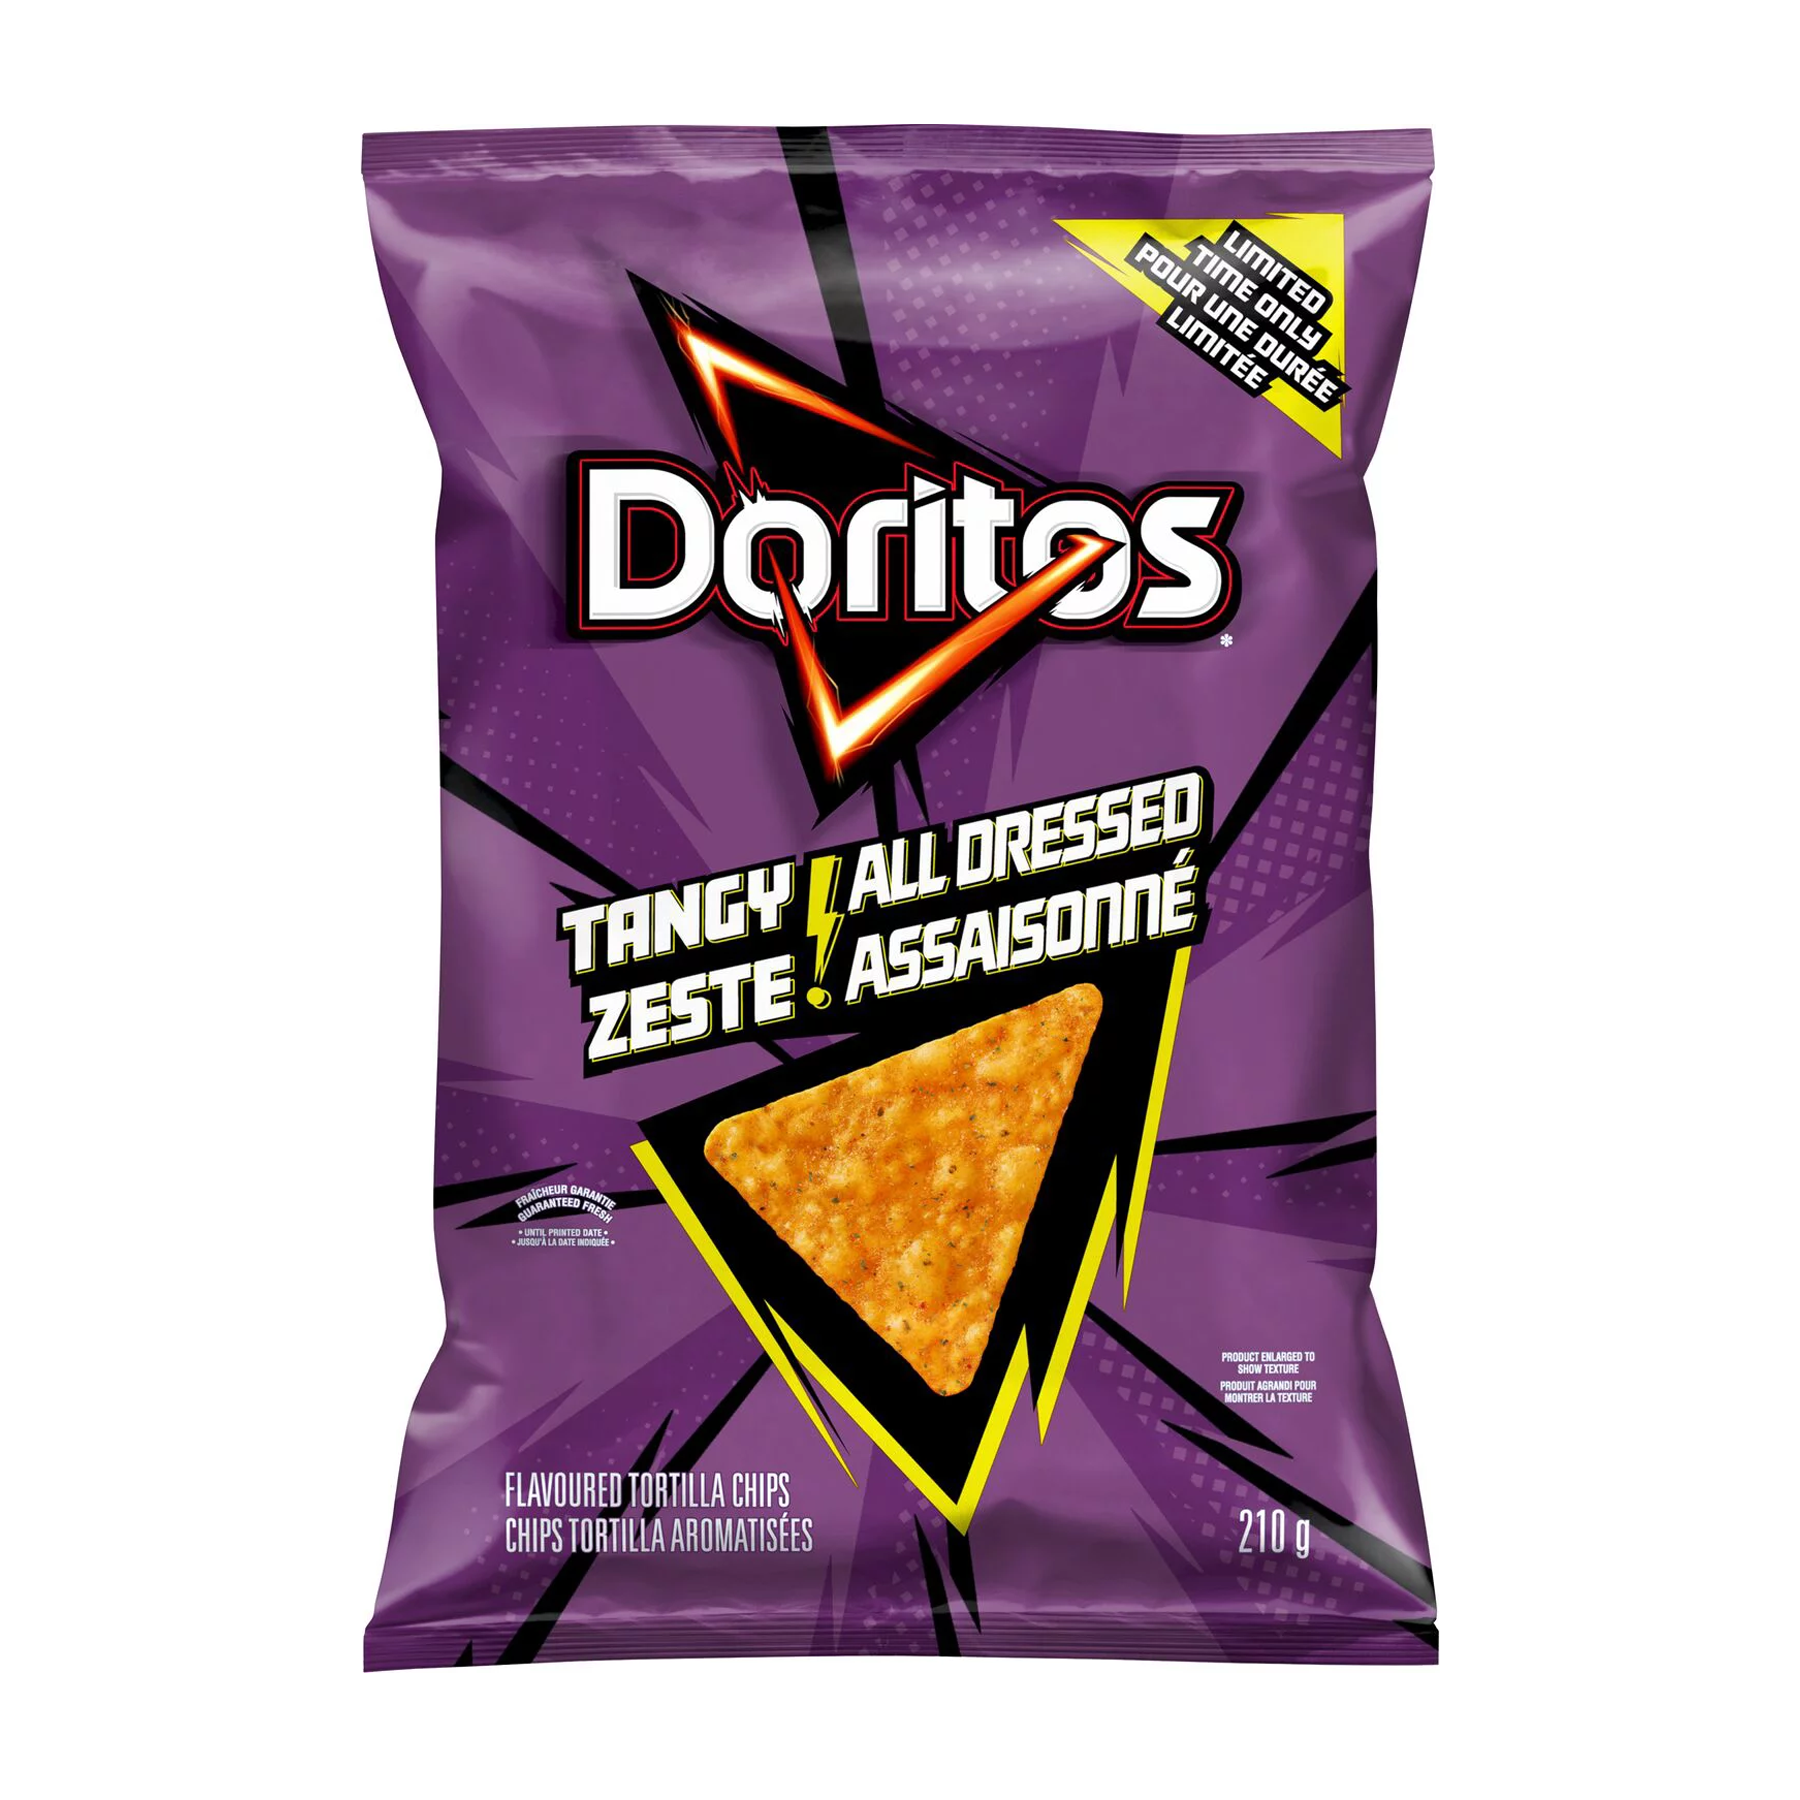 Dortitos Tangy All Dressed Flavored Chips